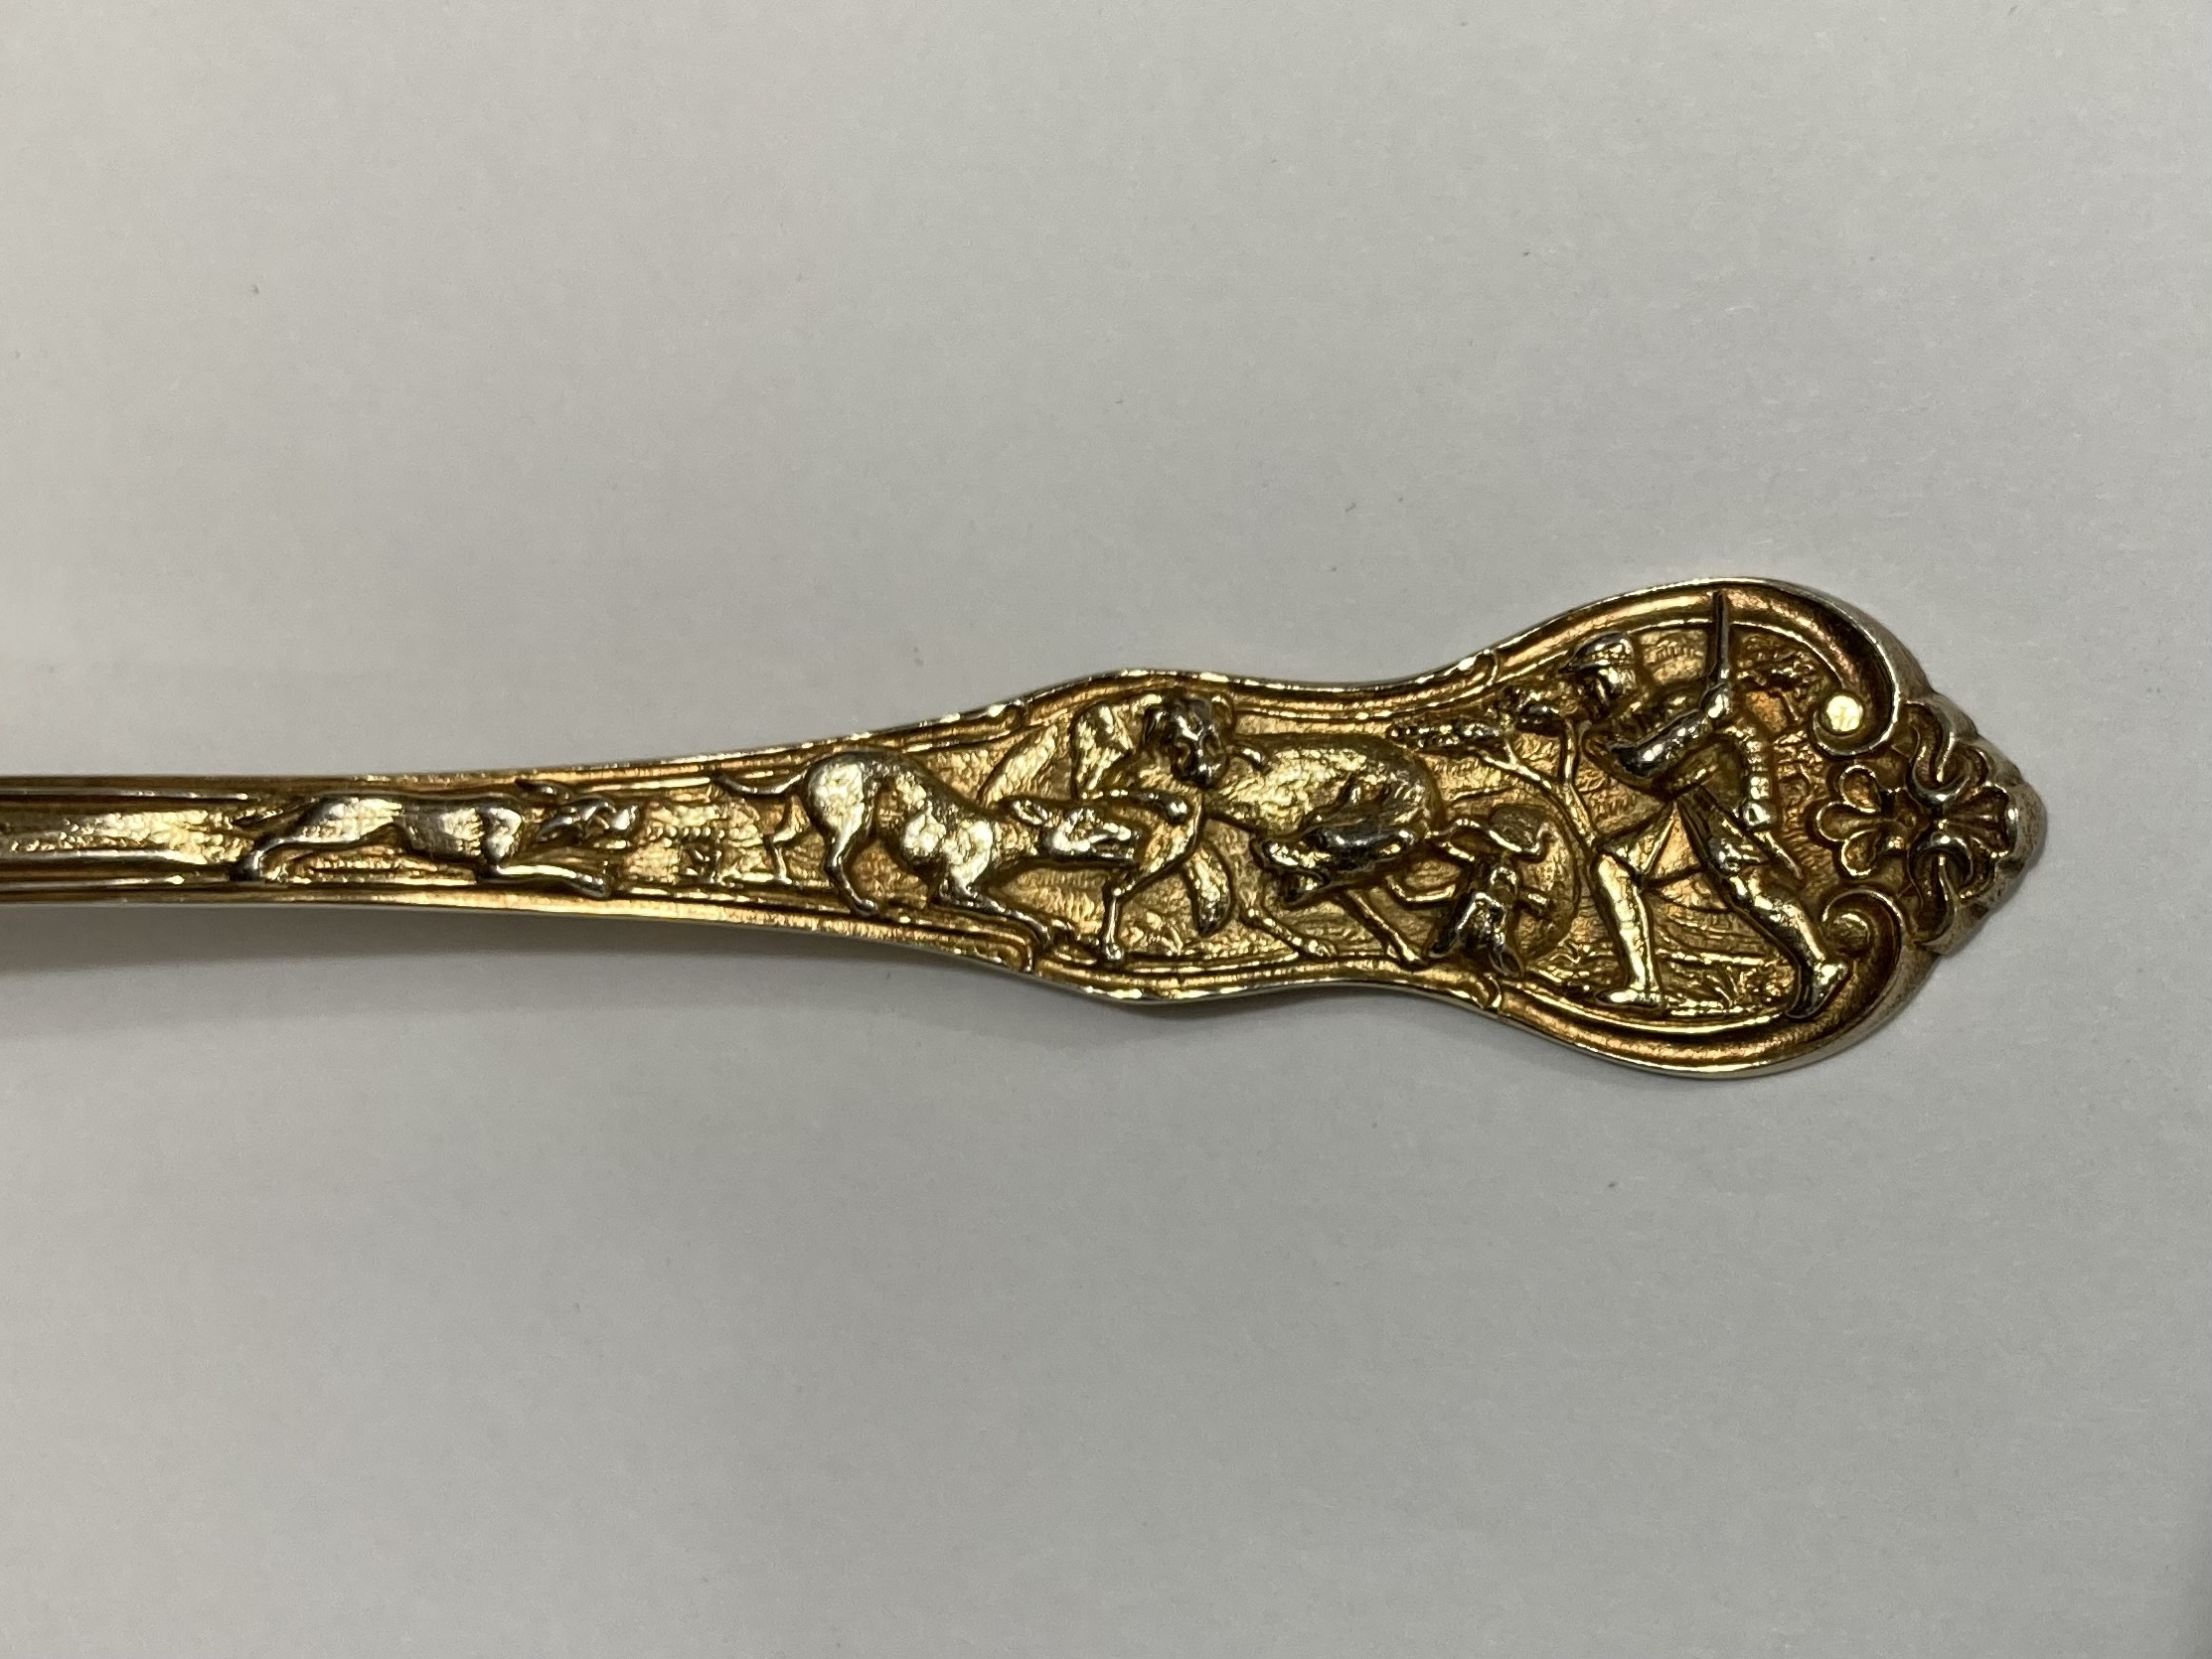 A FRENCH RARE SILVER-GILT SAUCE LADLE, EARLY 19TH CENTURY - Image 2 of 5